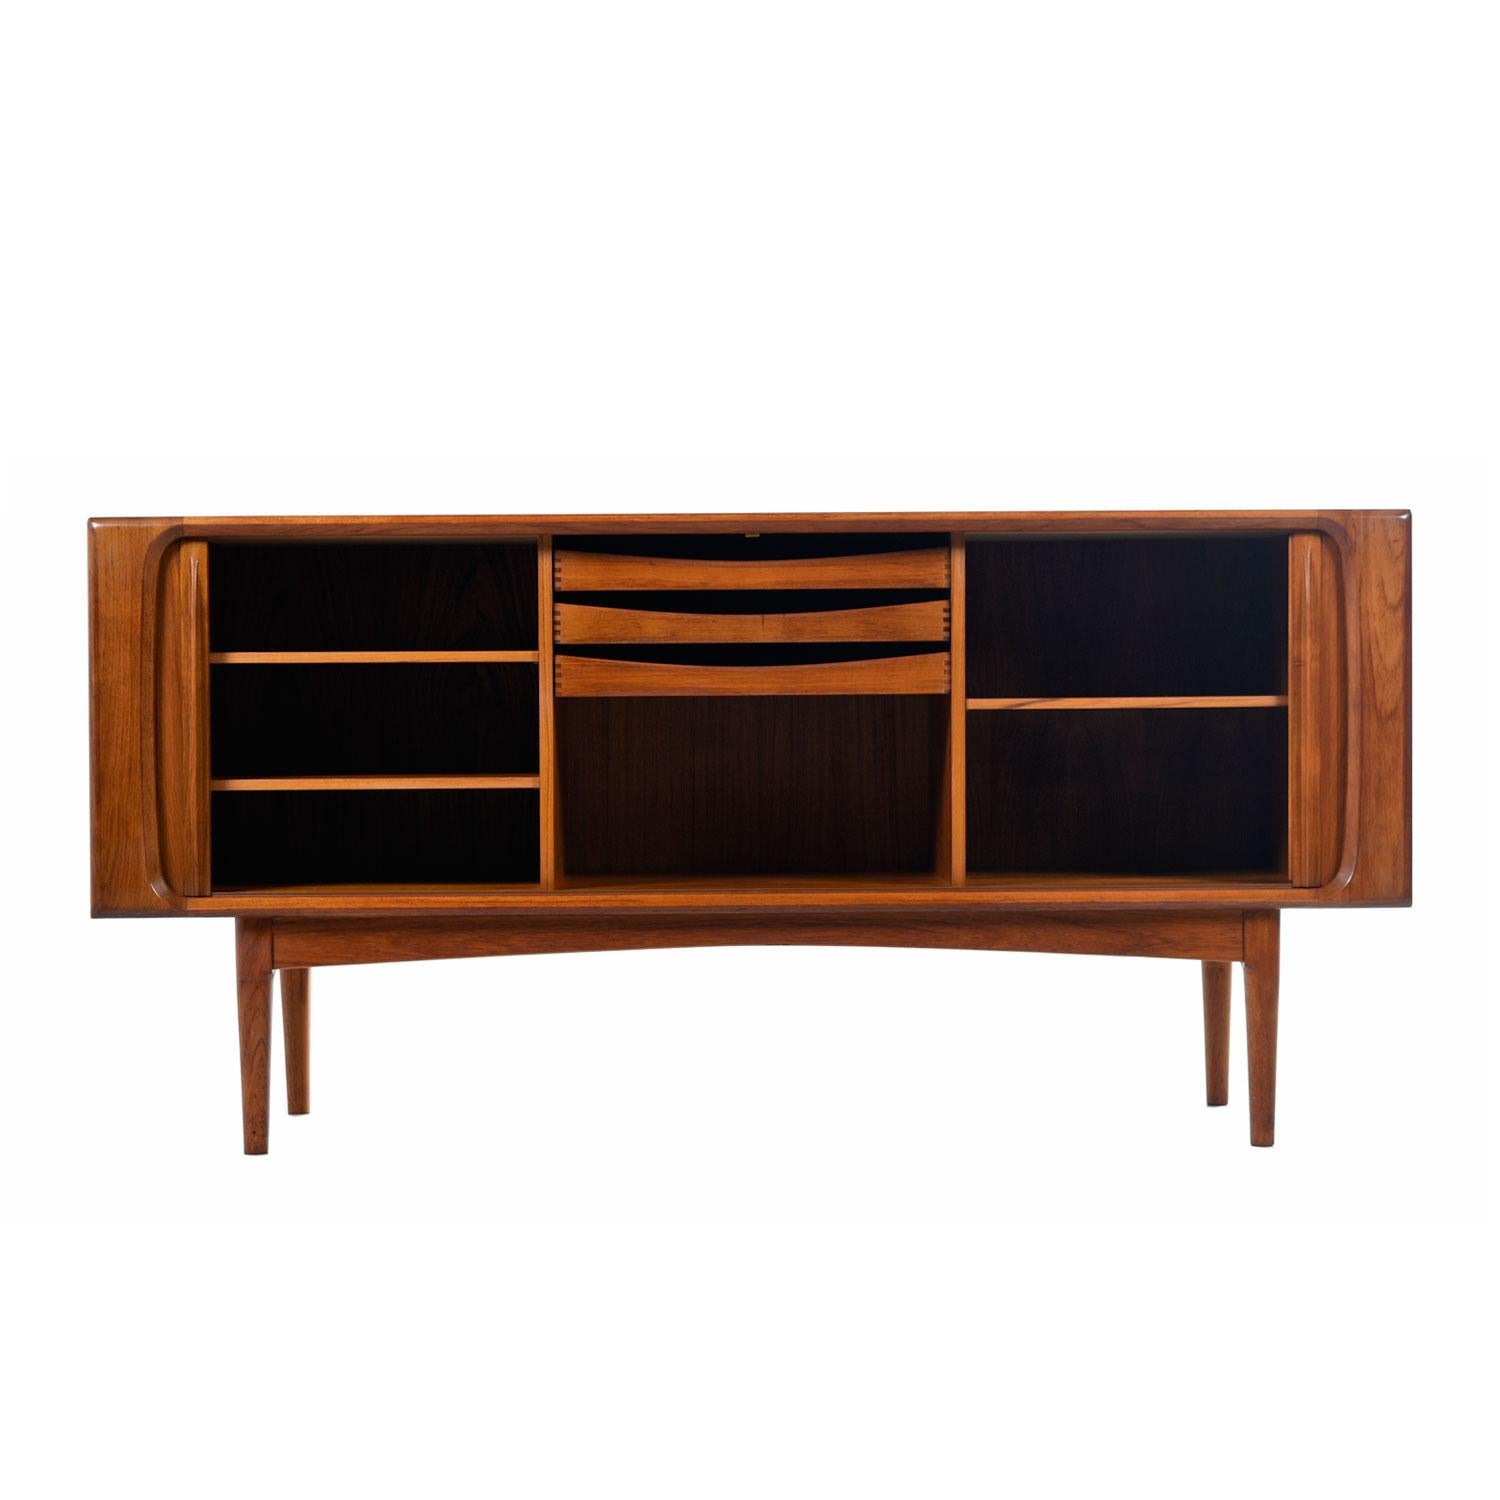 Vintage midcentury Scandinavian Modern Danish teak tambour door credenza by Bernhard Pedersen & Son. Expertly crafted with sleek lip-like, solid teak carved handles gracing the tambour doors. Open the cabinet to reveal cabinet space at left and